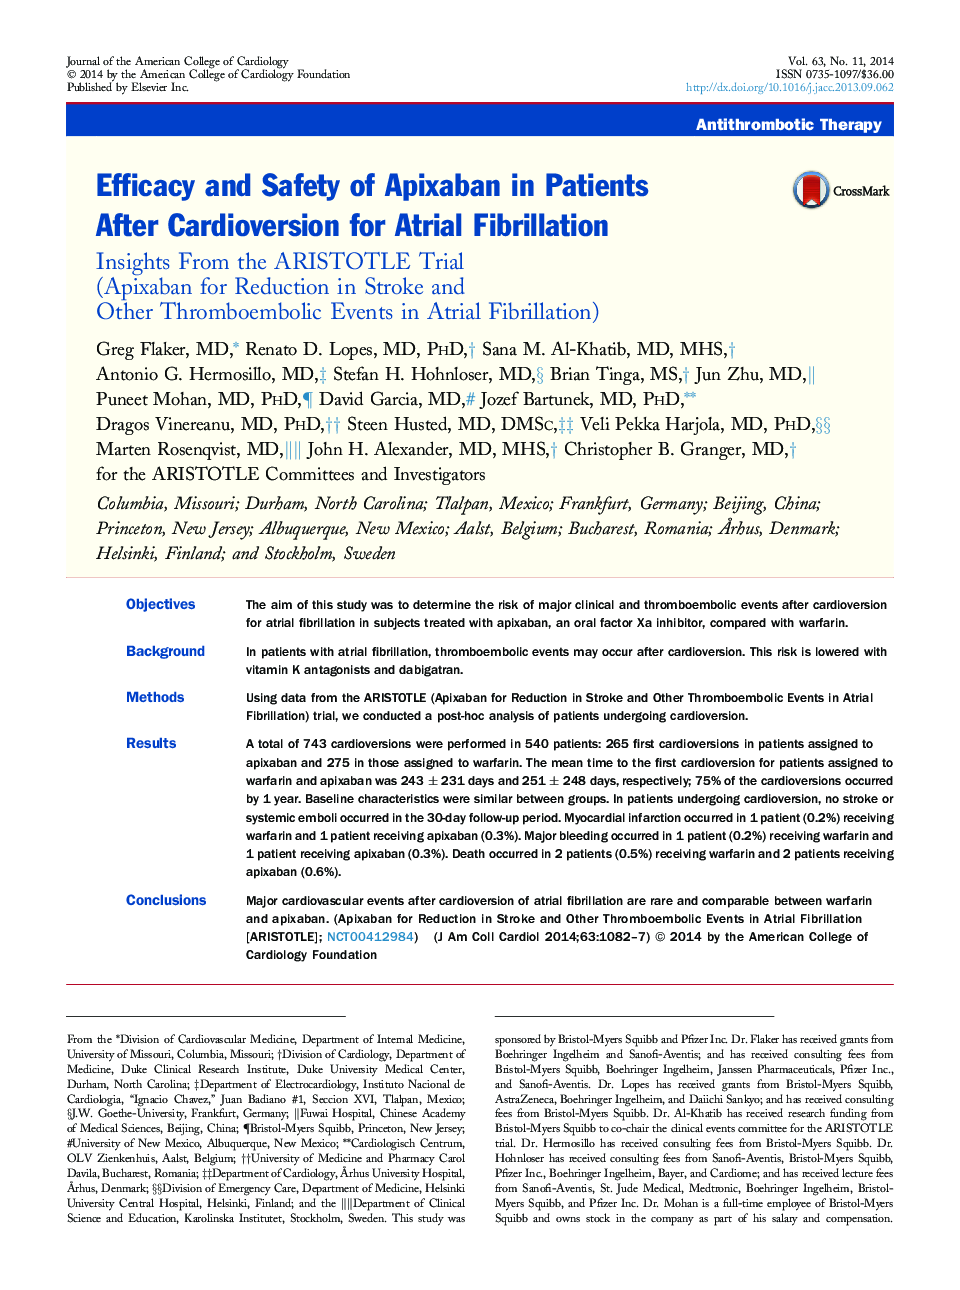 Efficacy and Safety of Apixaban in Patients After Cardioversion for Atrial Fibrillation : Insights From the ARISTOTLE Trial (Apixaban for Reduction in Stroke and Other Thromboembolic Events in Atrial Fibrillation)